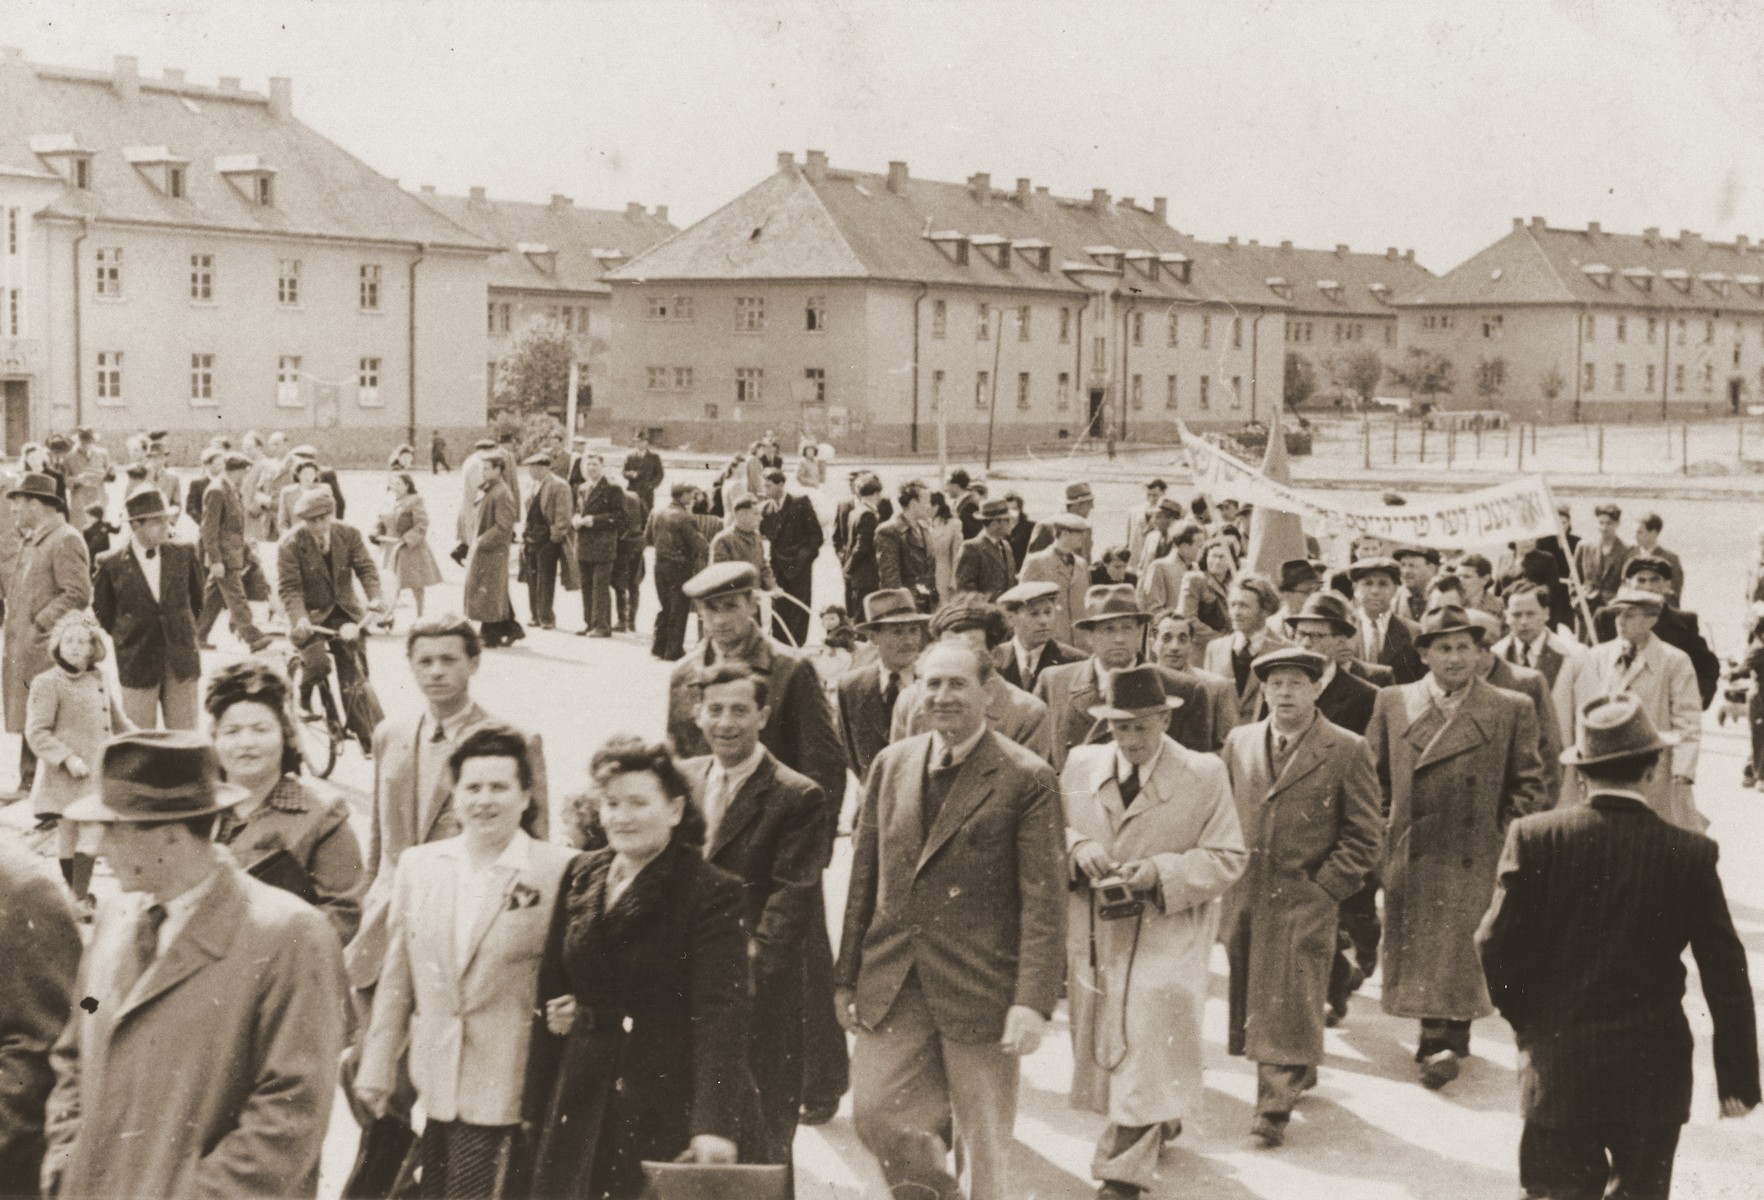 Demonstration demanding that the Jews be let into Palestine in the Belsen DP camp.  In the back are the former officer baracks.

Dora Friedfertig is standing in the front  linking arms with Zosia Weinman.  Behind them are Shmuel Weinman and Walter Loberstein.